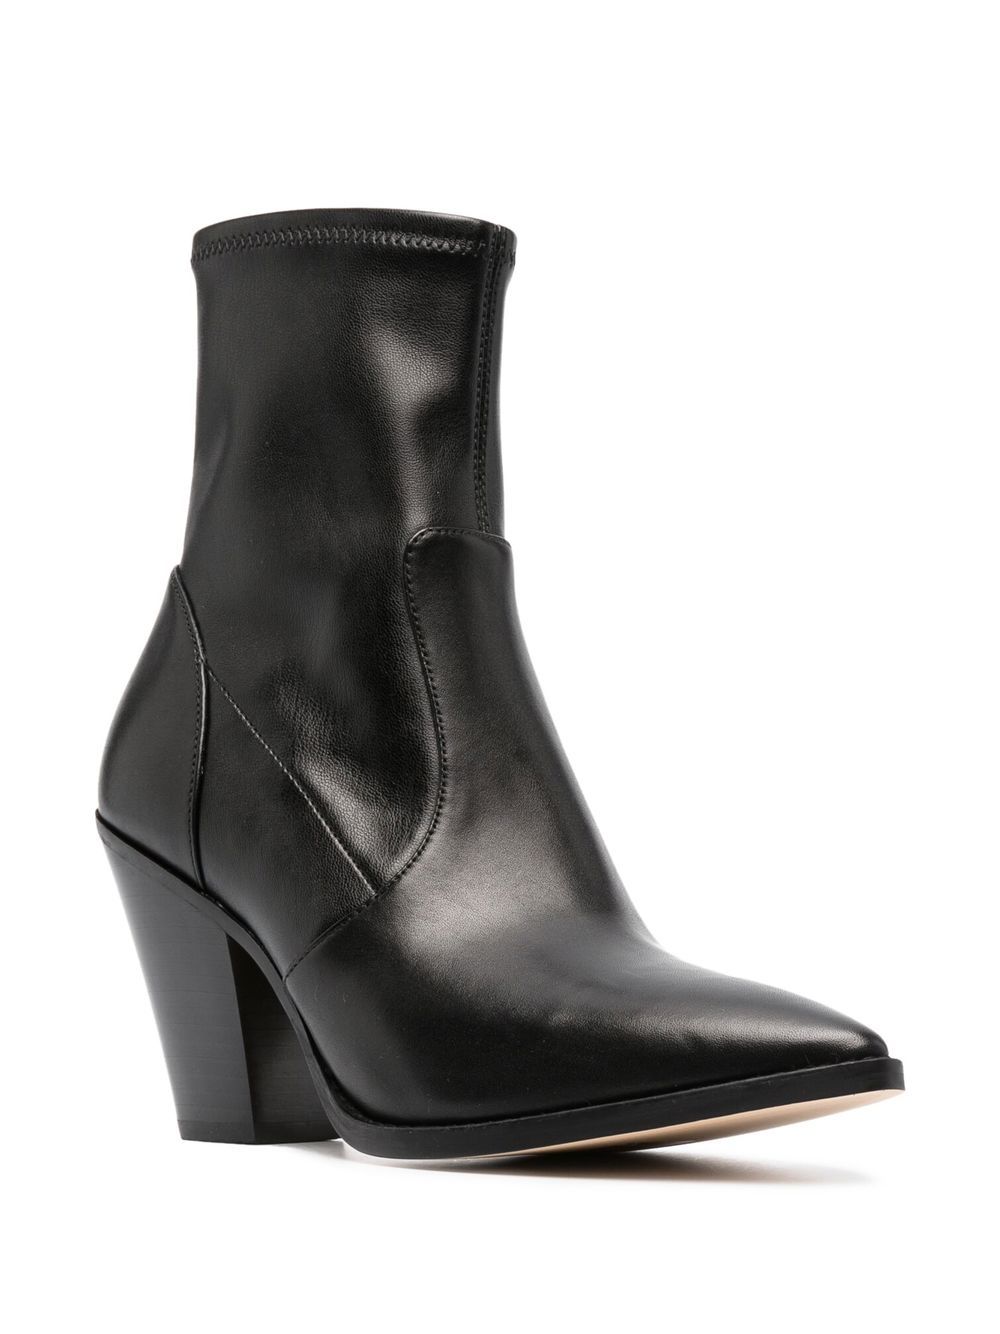 Michael Michael Kors Dover Ankle 85mm Boots - Farfetch